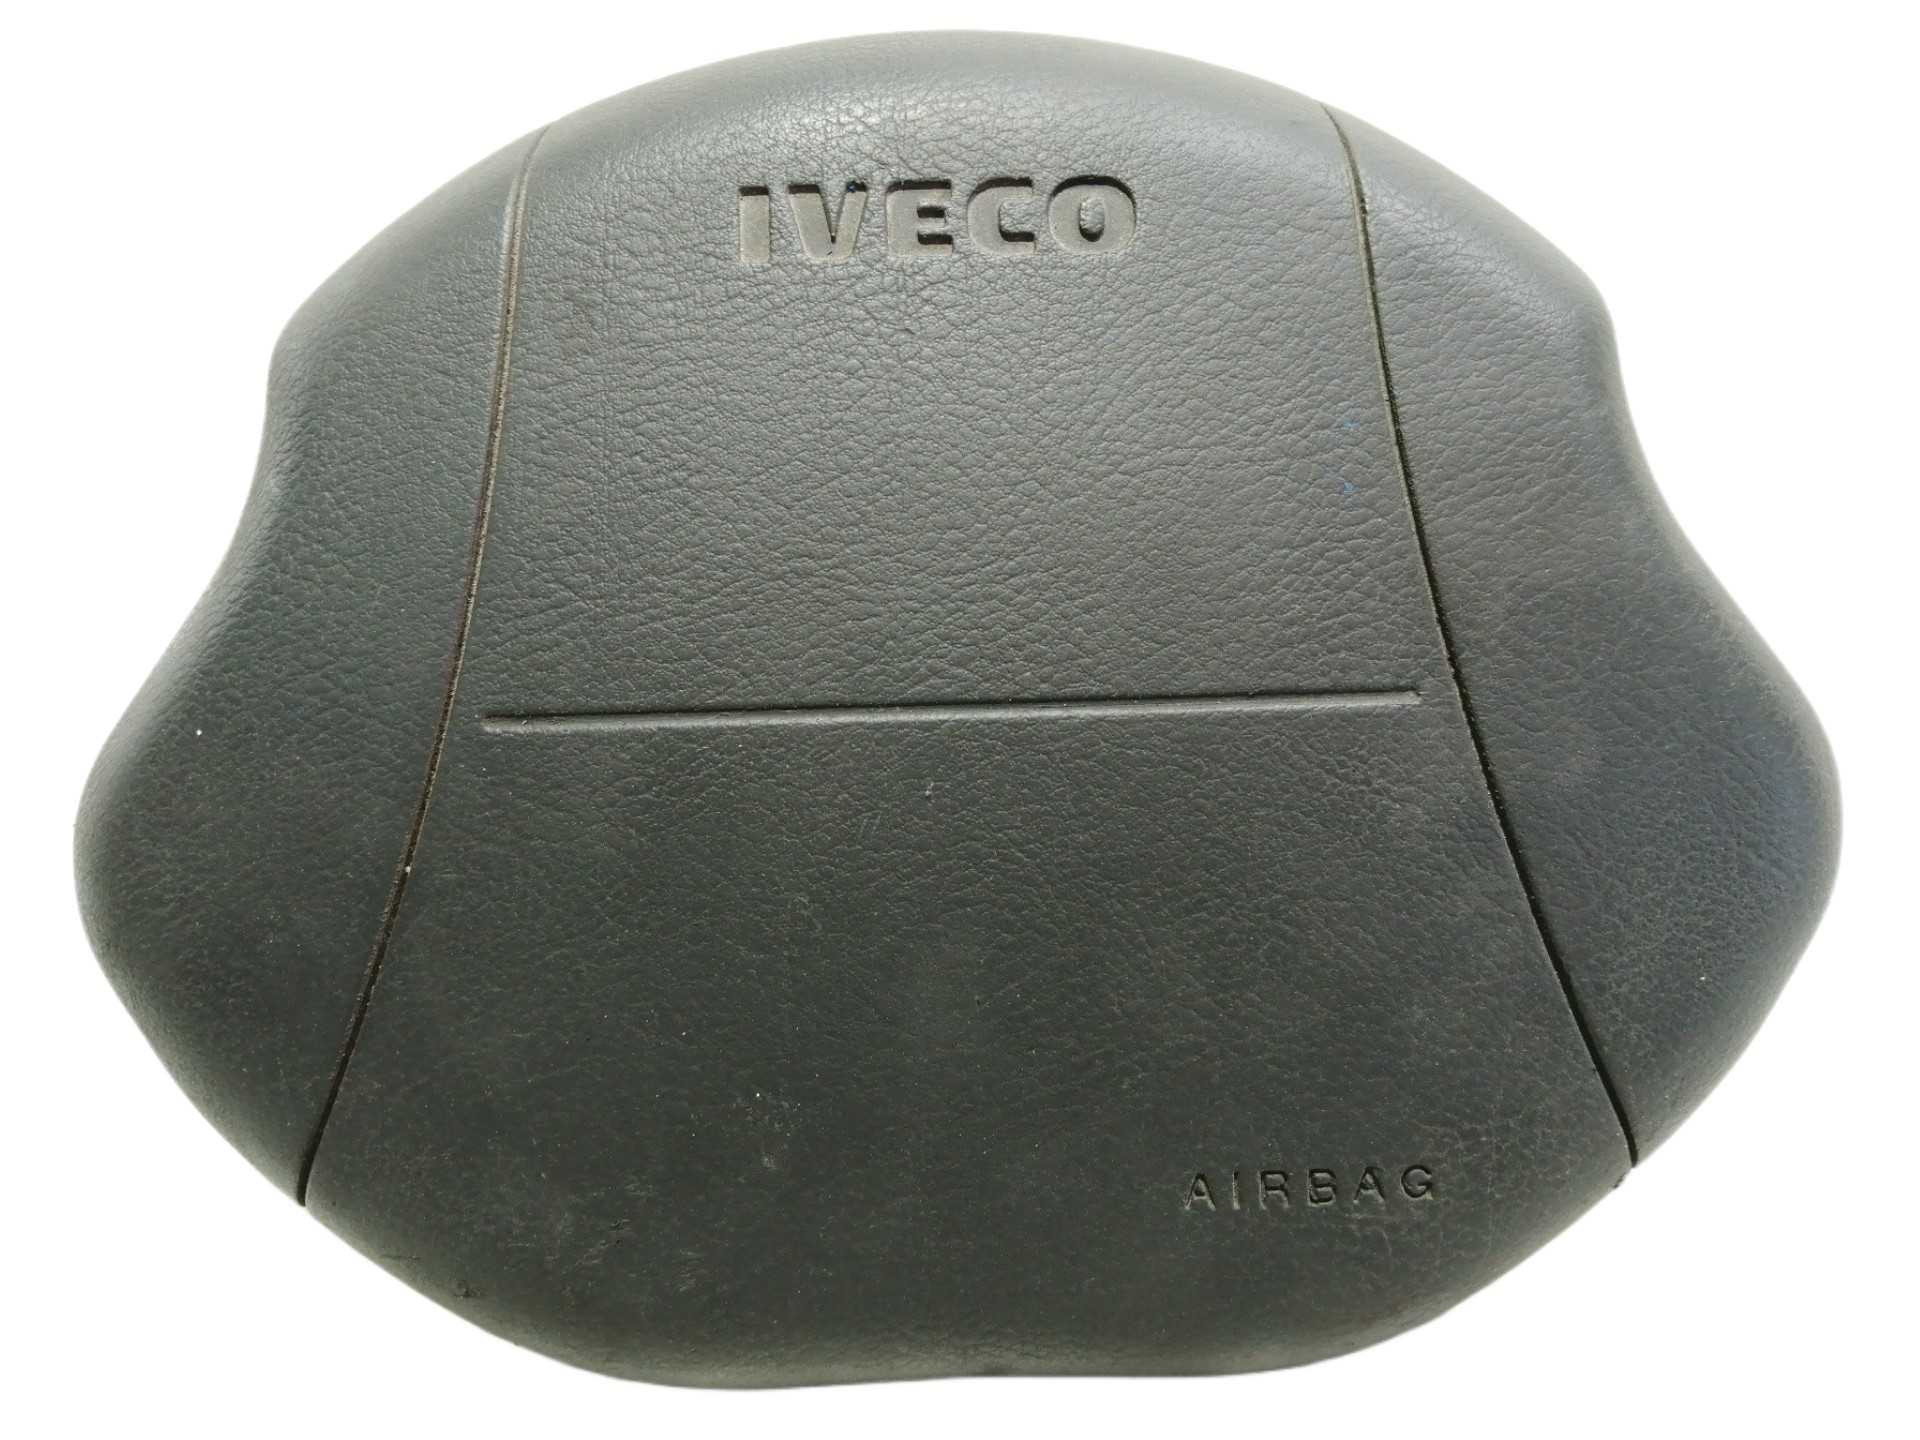 Iveco Algemeen AIRBAG LENKRAD 500331825/S001313398/010443120160/30003033A